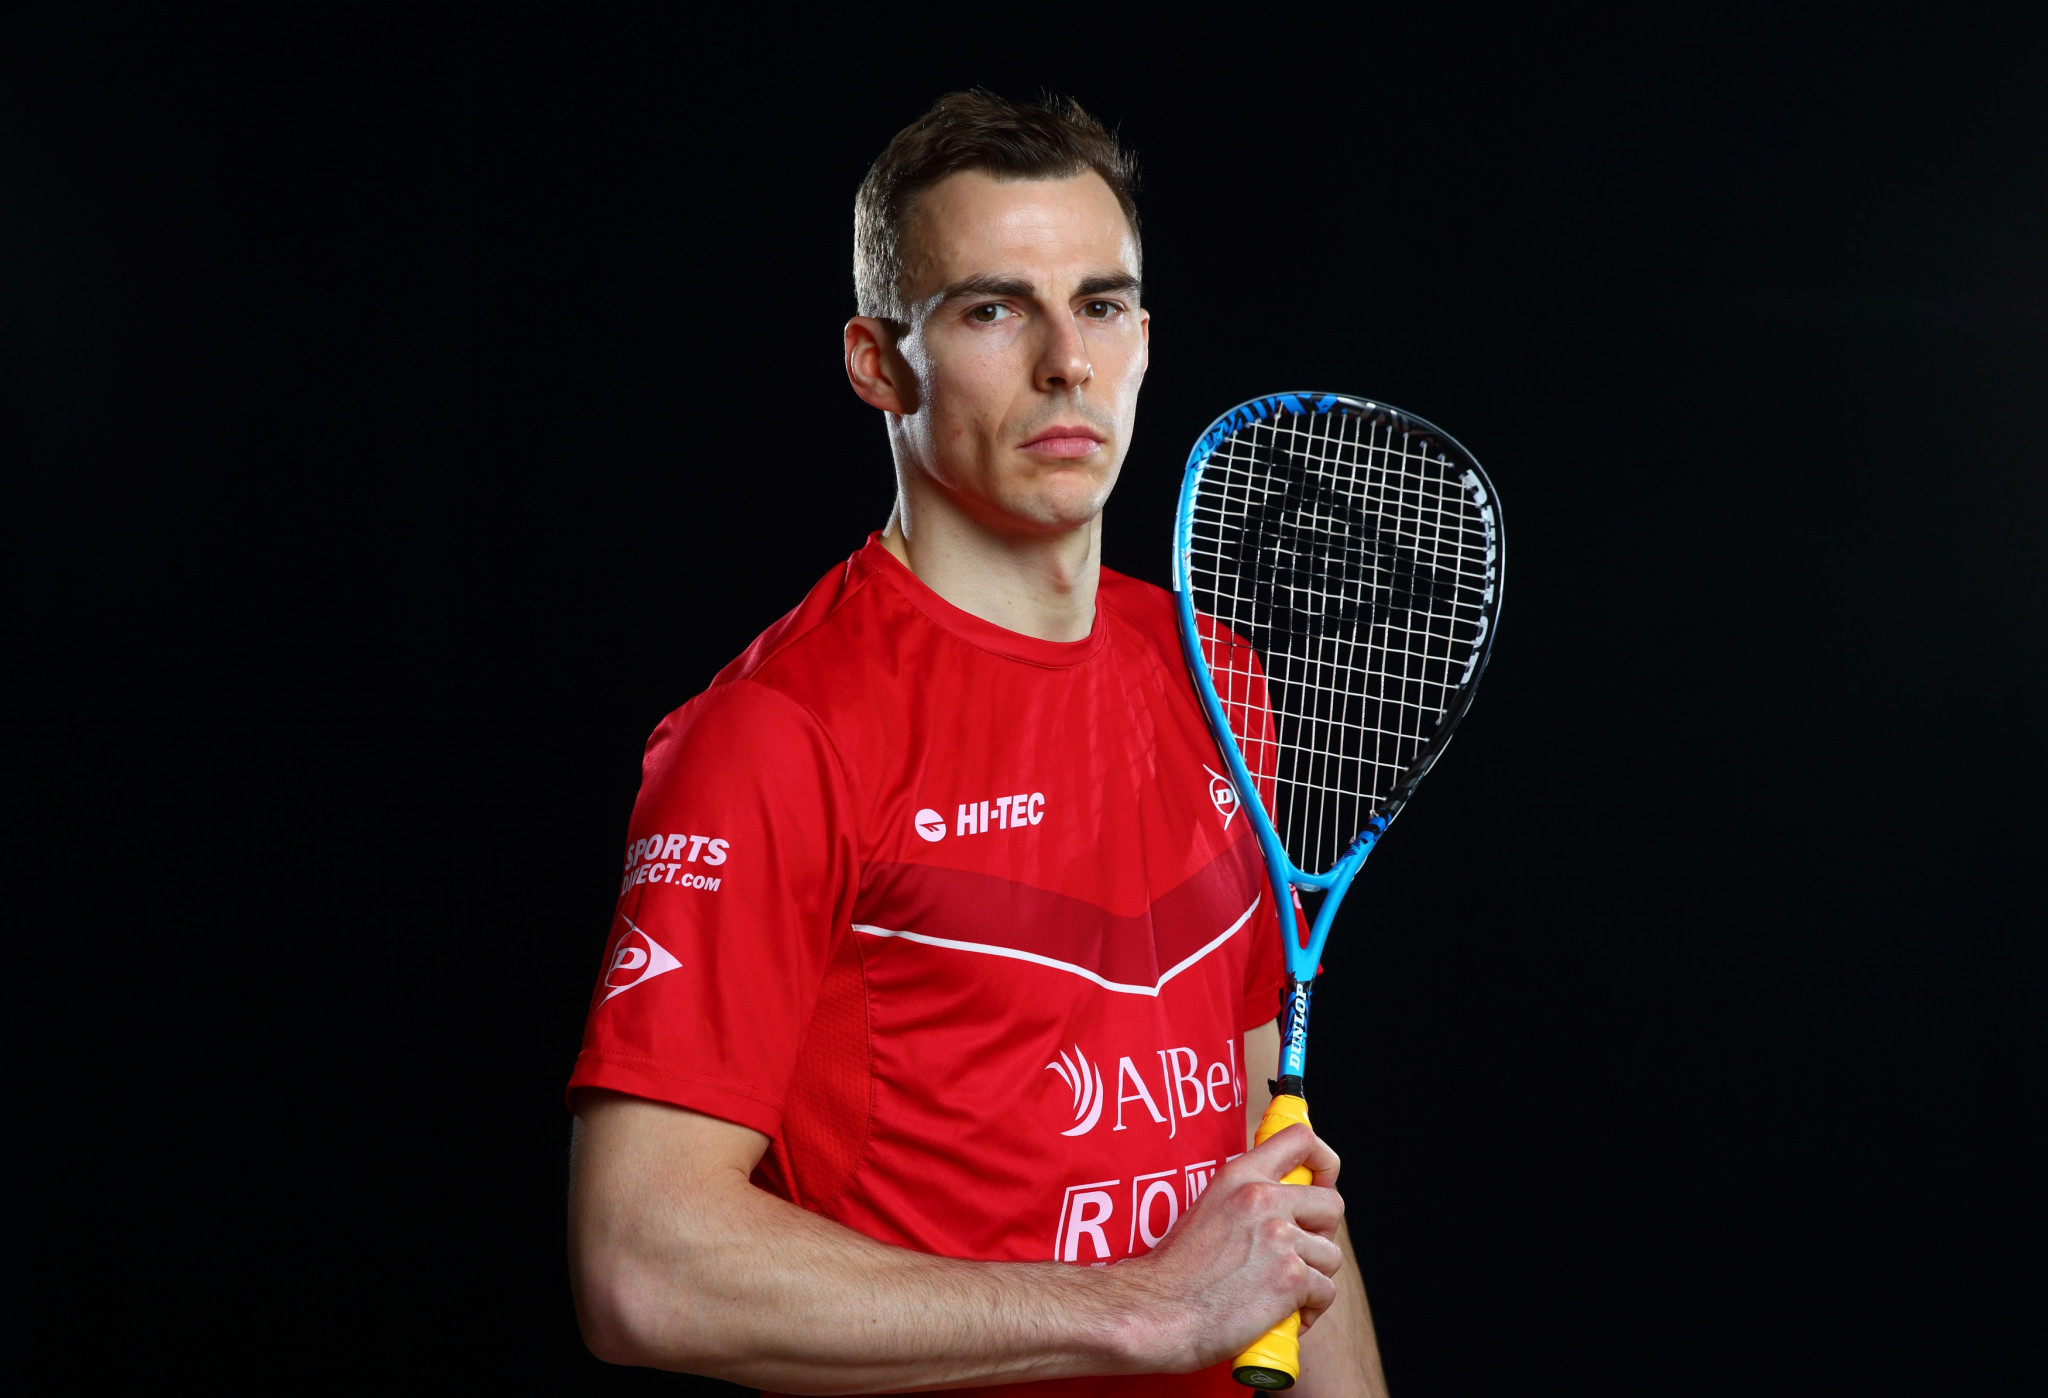 Squash star Matthew set for exhibition to begin final year before retirement